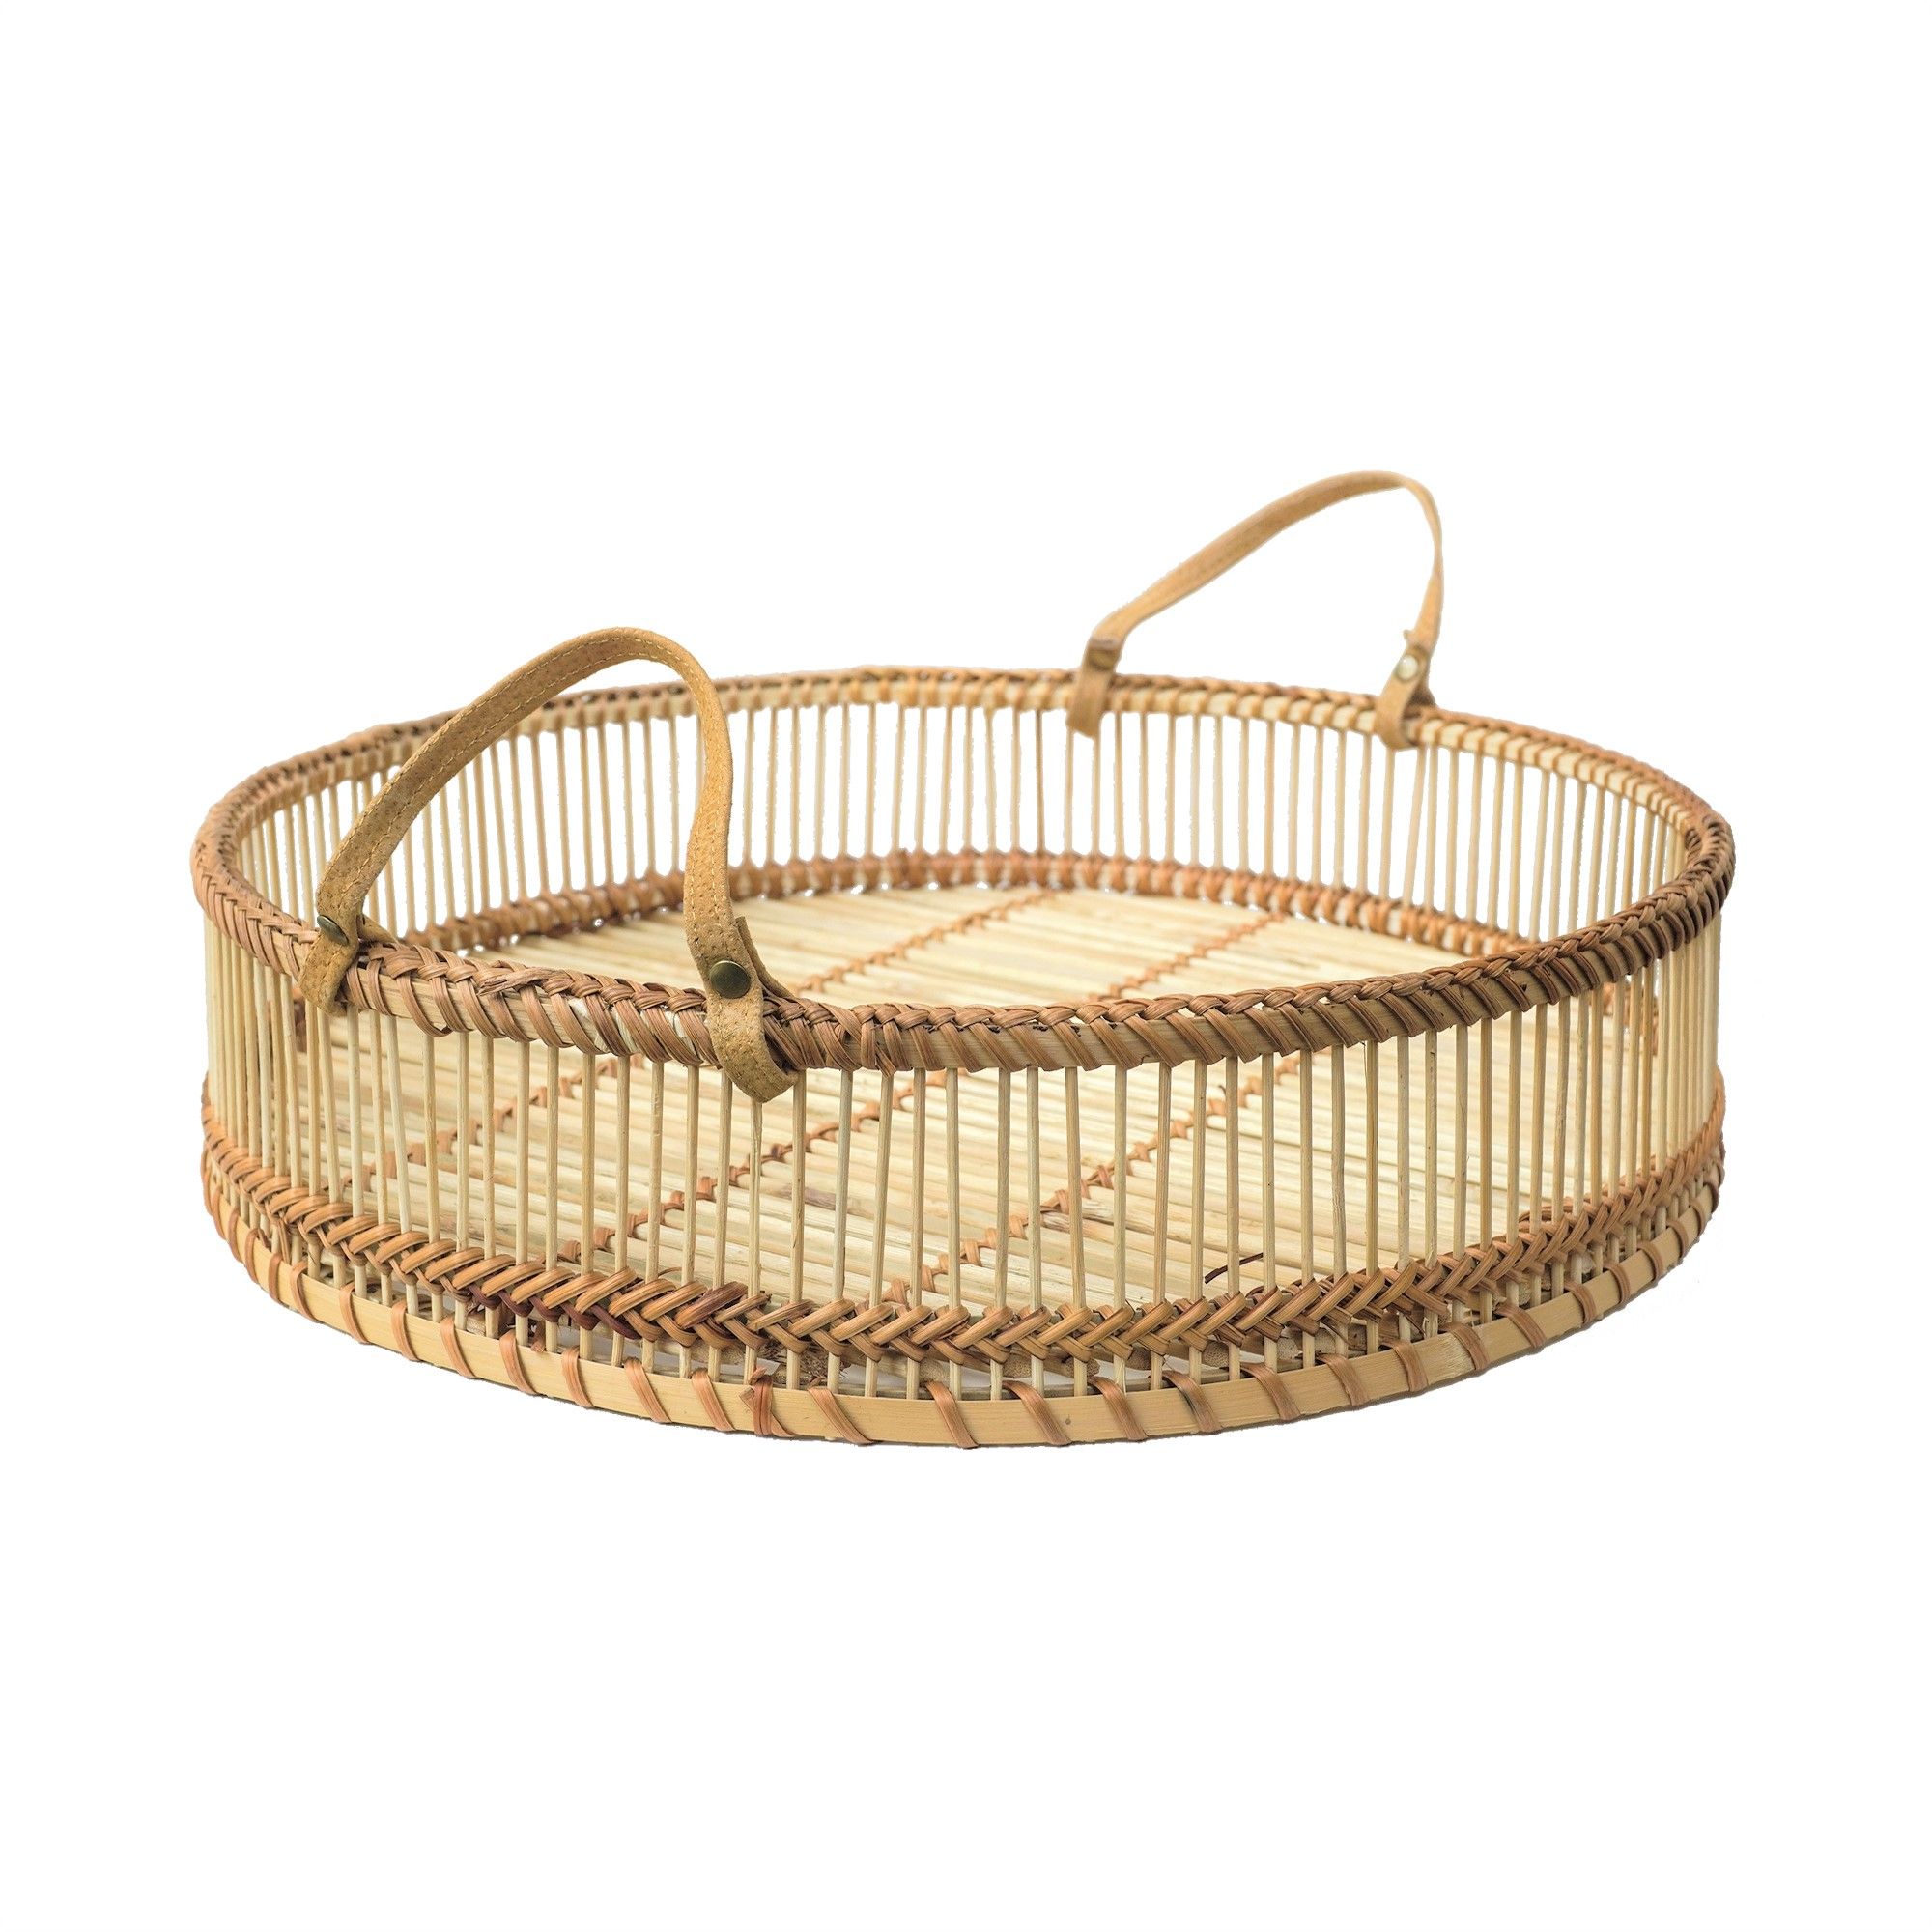  Round Rattan Tray with Handles - Natural 